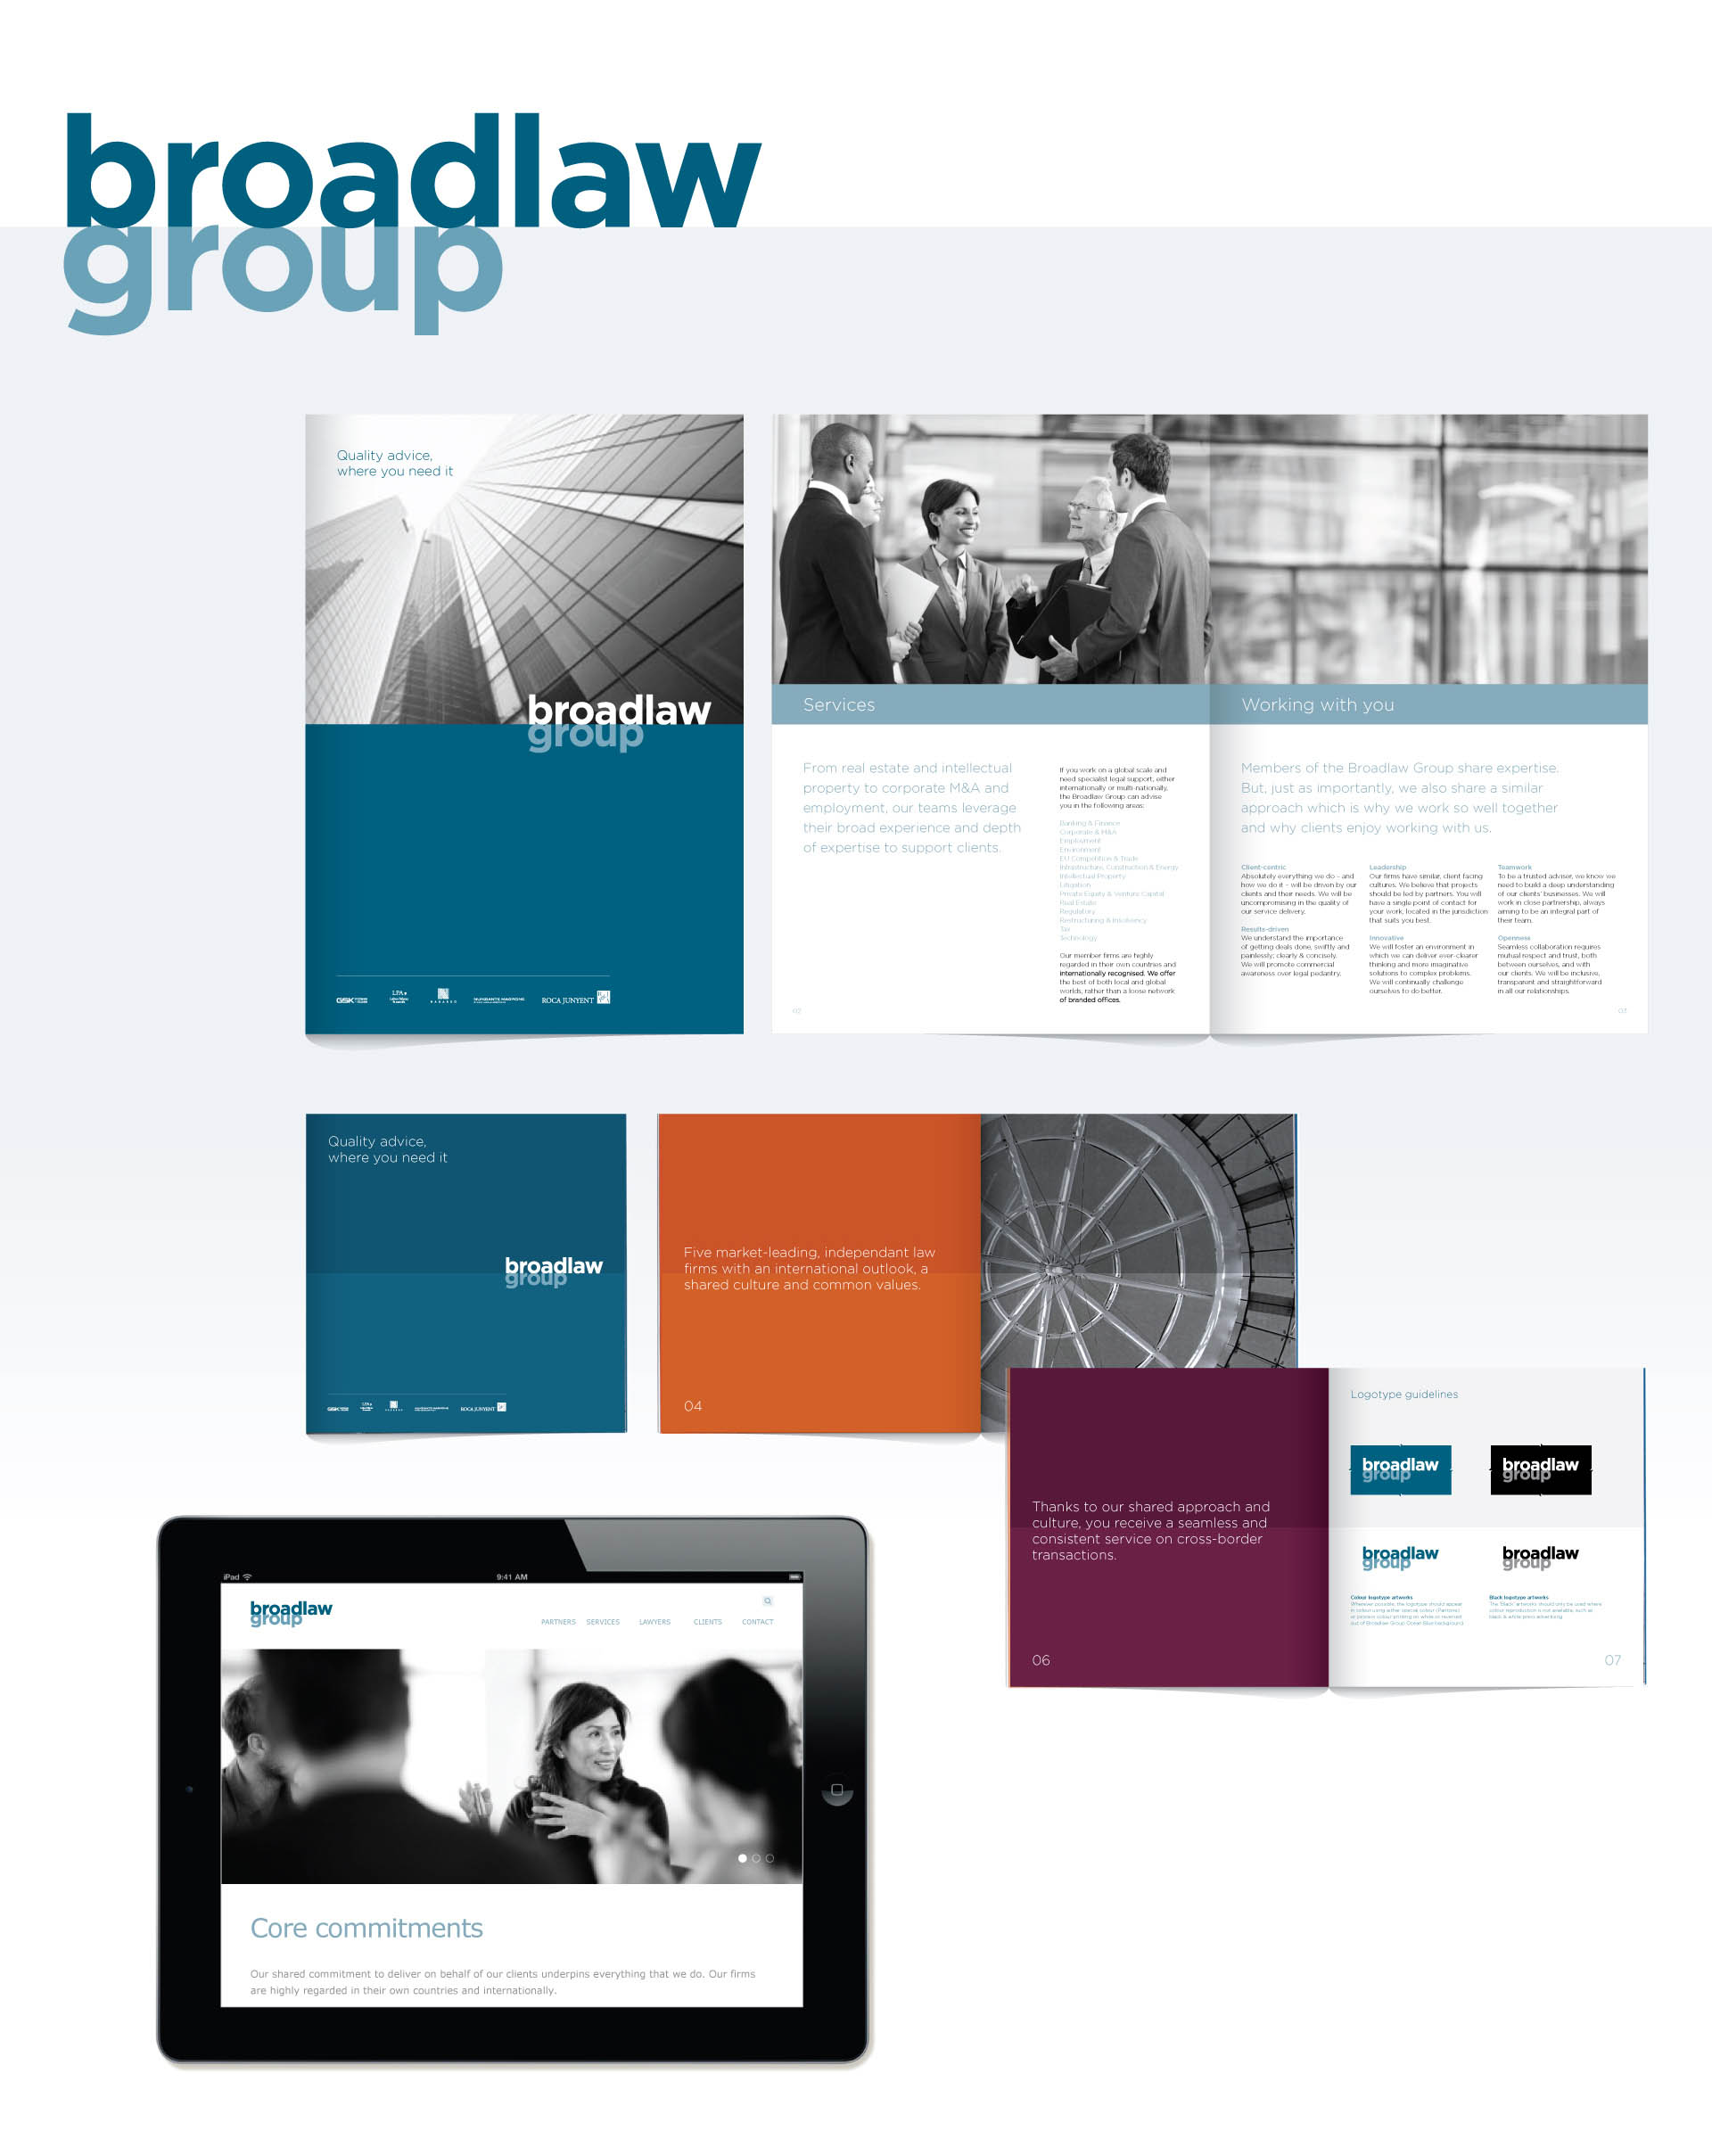 Corporate identity and visual language for Broadlaw Group – bringing together five market-leading independant law firms in 31 offices across Asia, Europe, the Middle East and North Africa